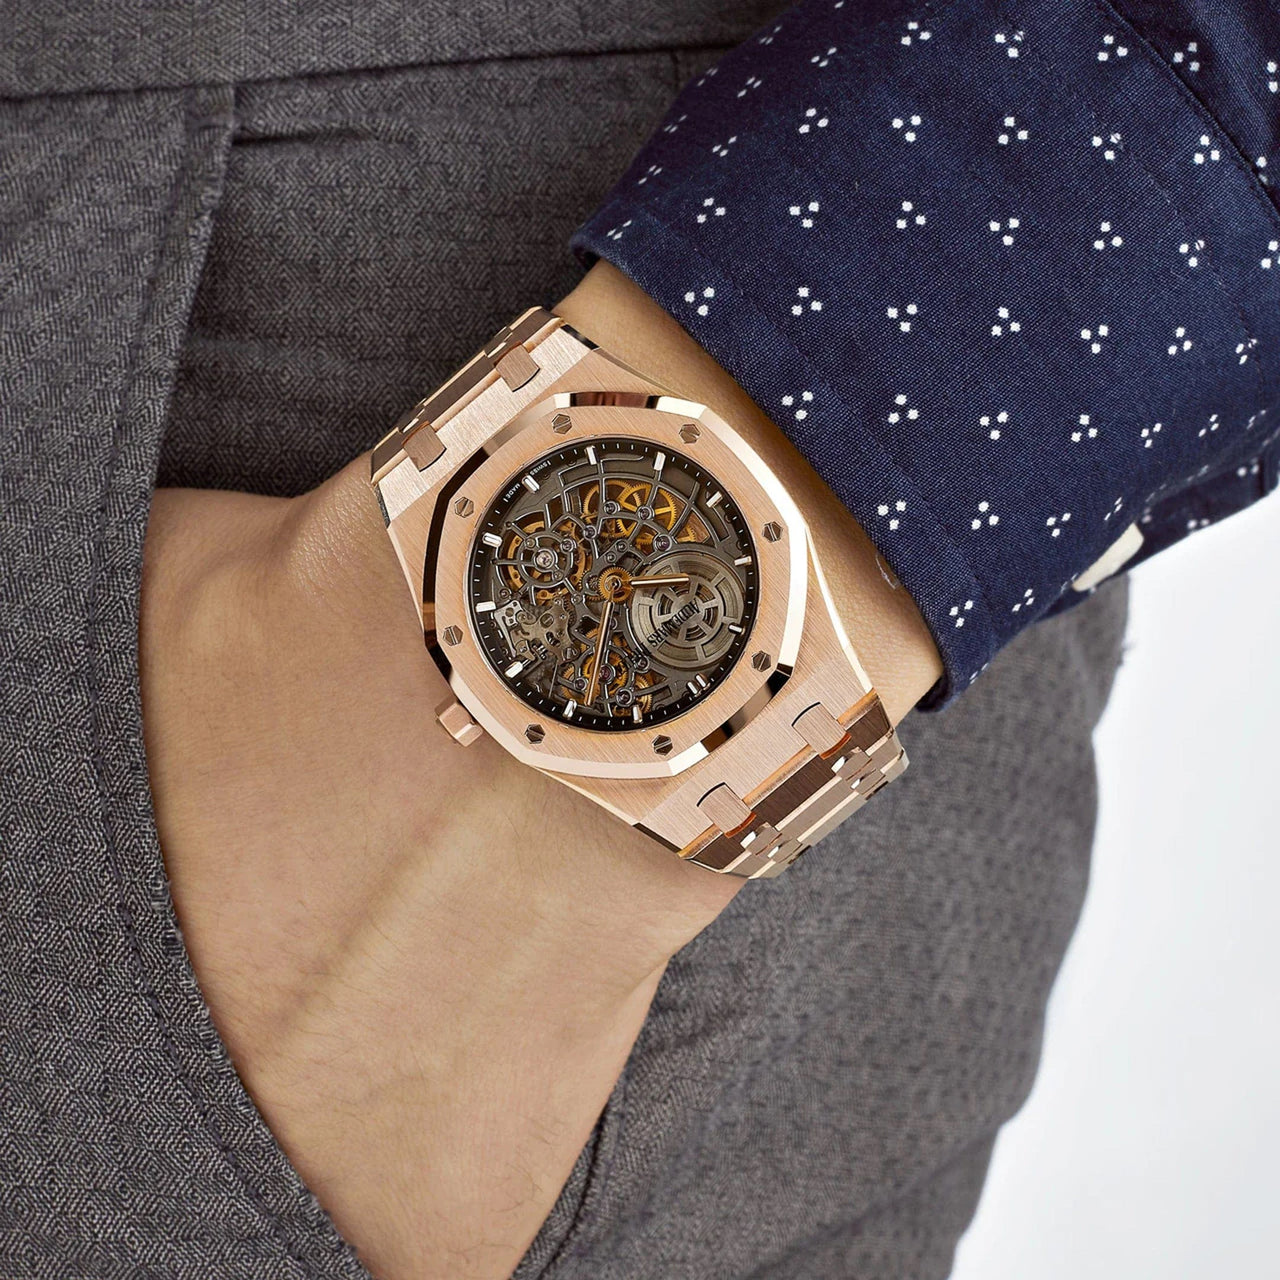 Audemars Piguet Royal Oak Openworked 'Jumbo' Extra-Thin Rose Gold 16204OR.OO.1240OR.03